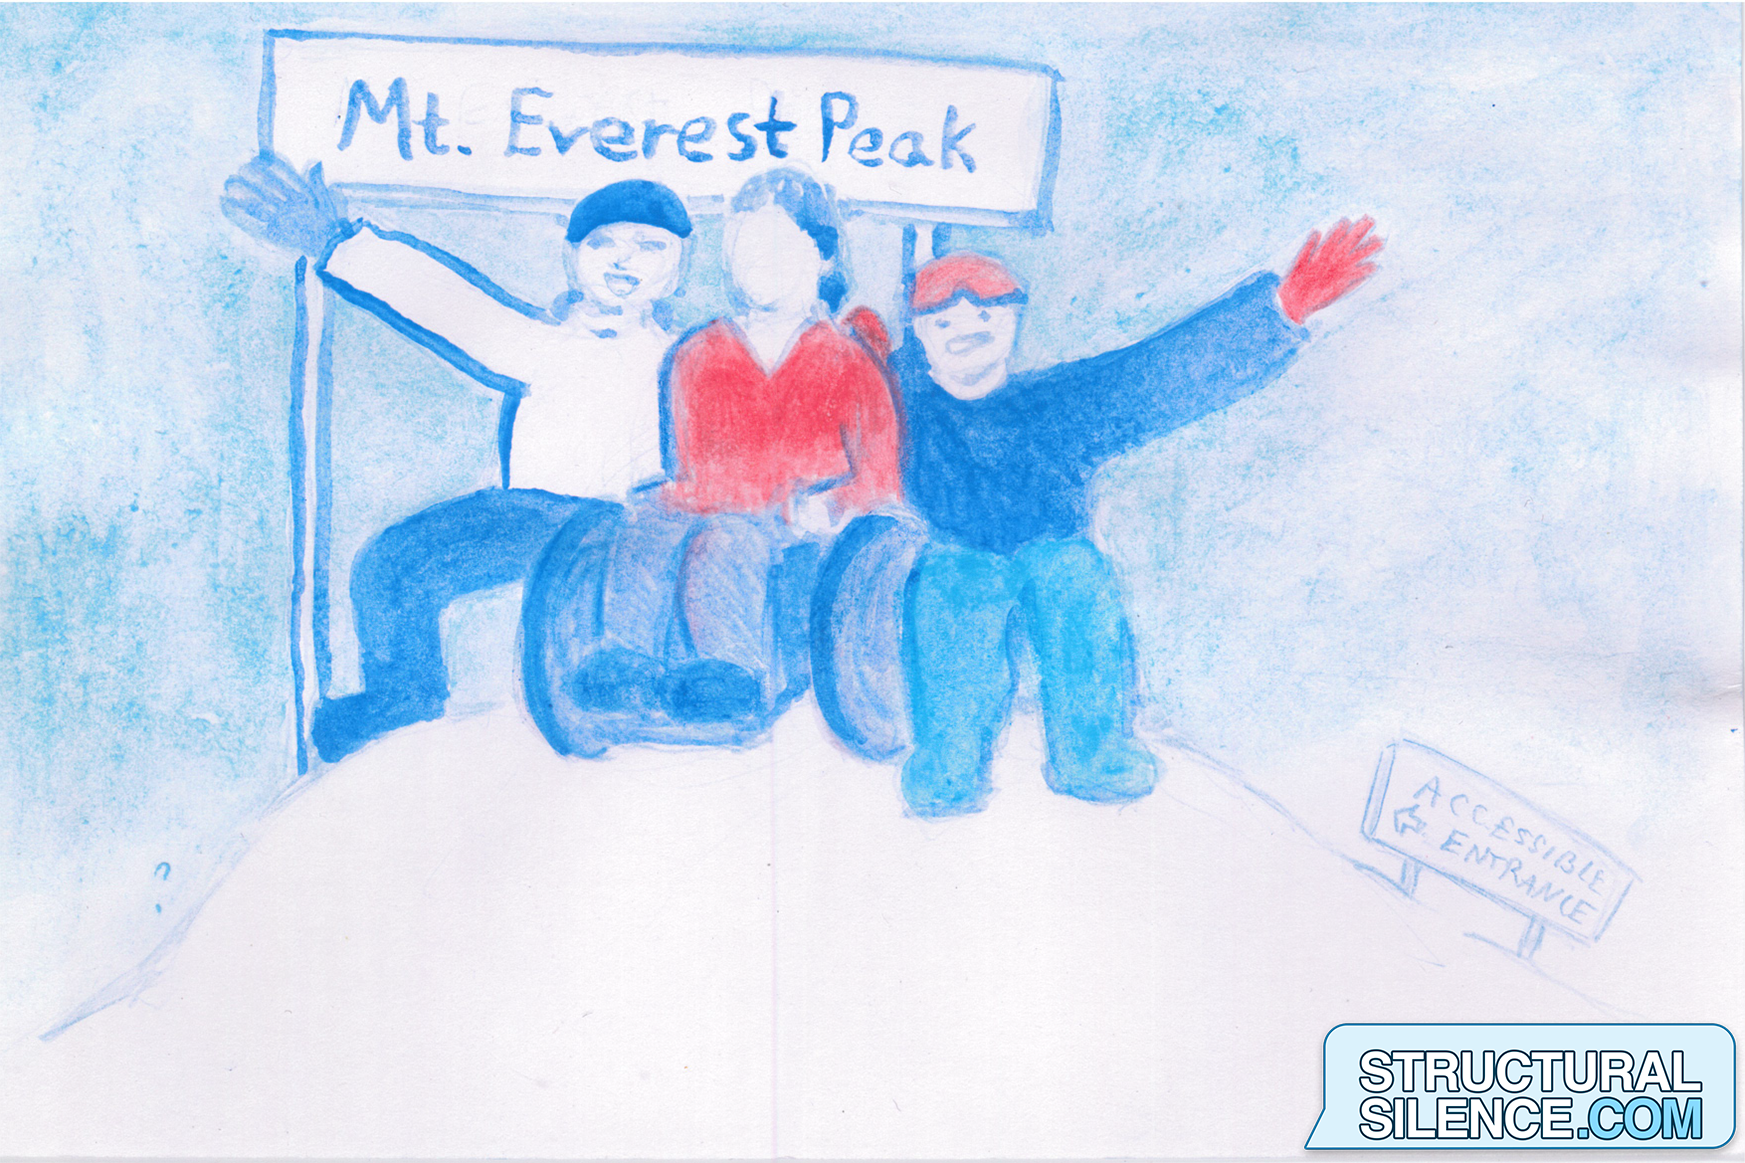 The wheelchaired character is at the peak of Mount Everest, surrounded by two hikers posing for a picture. There is an "accessible entrance" sign along the trail behind the character.